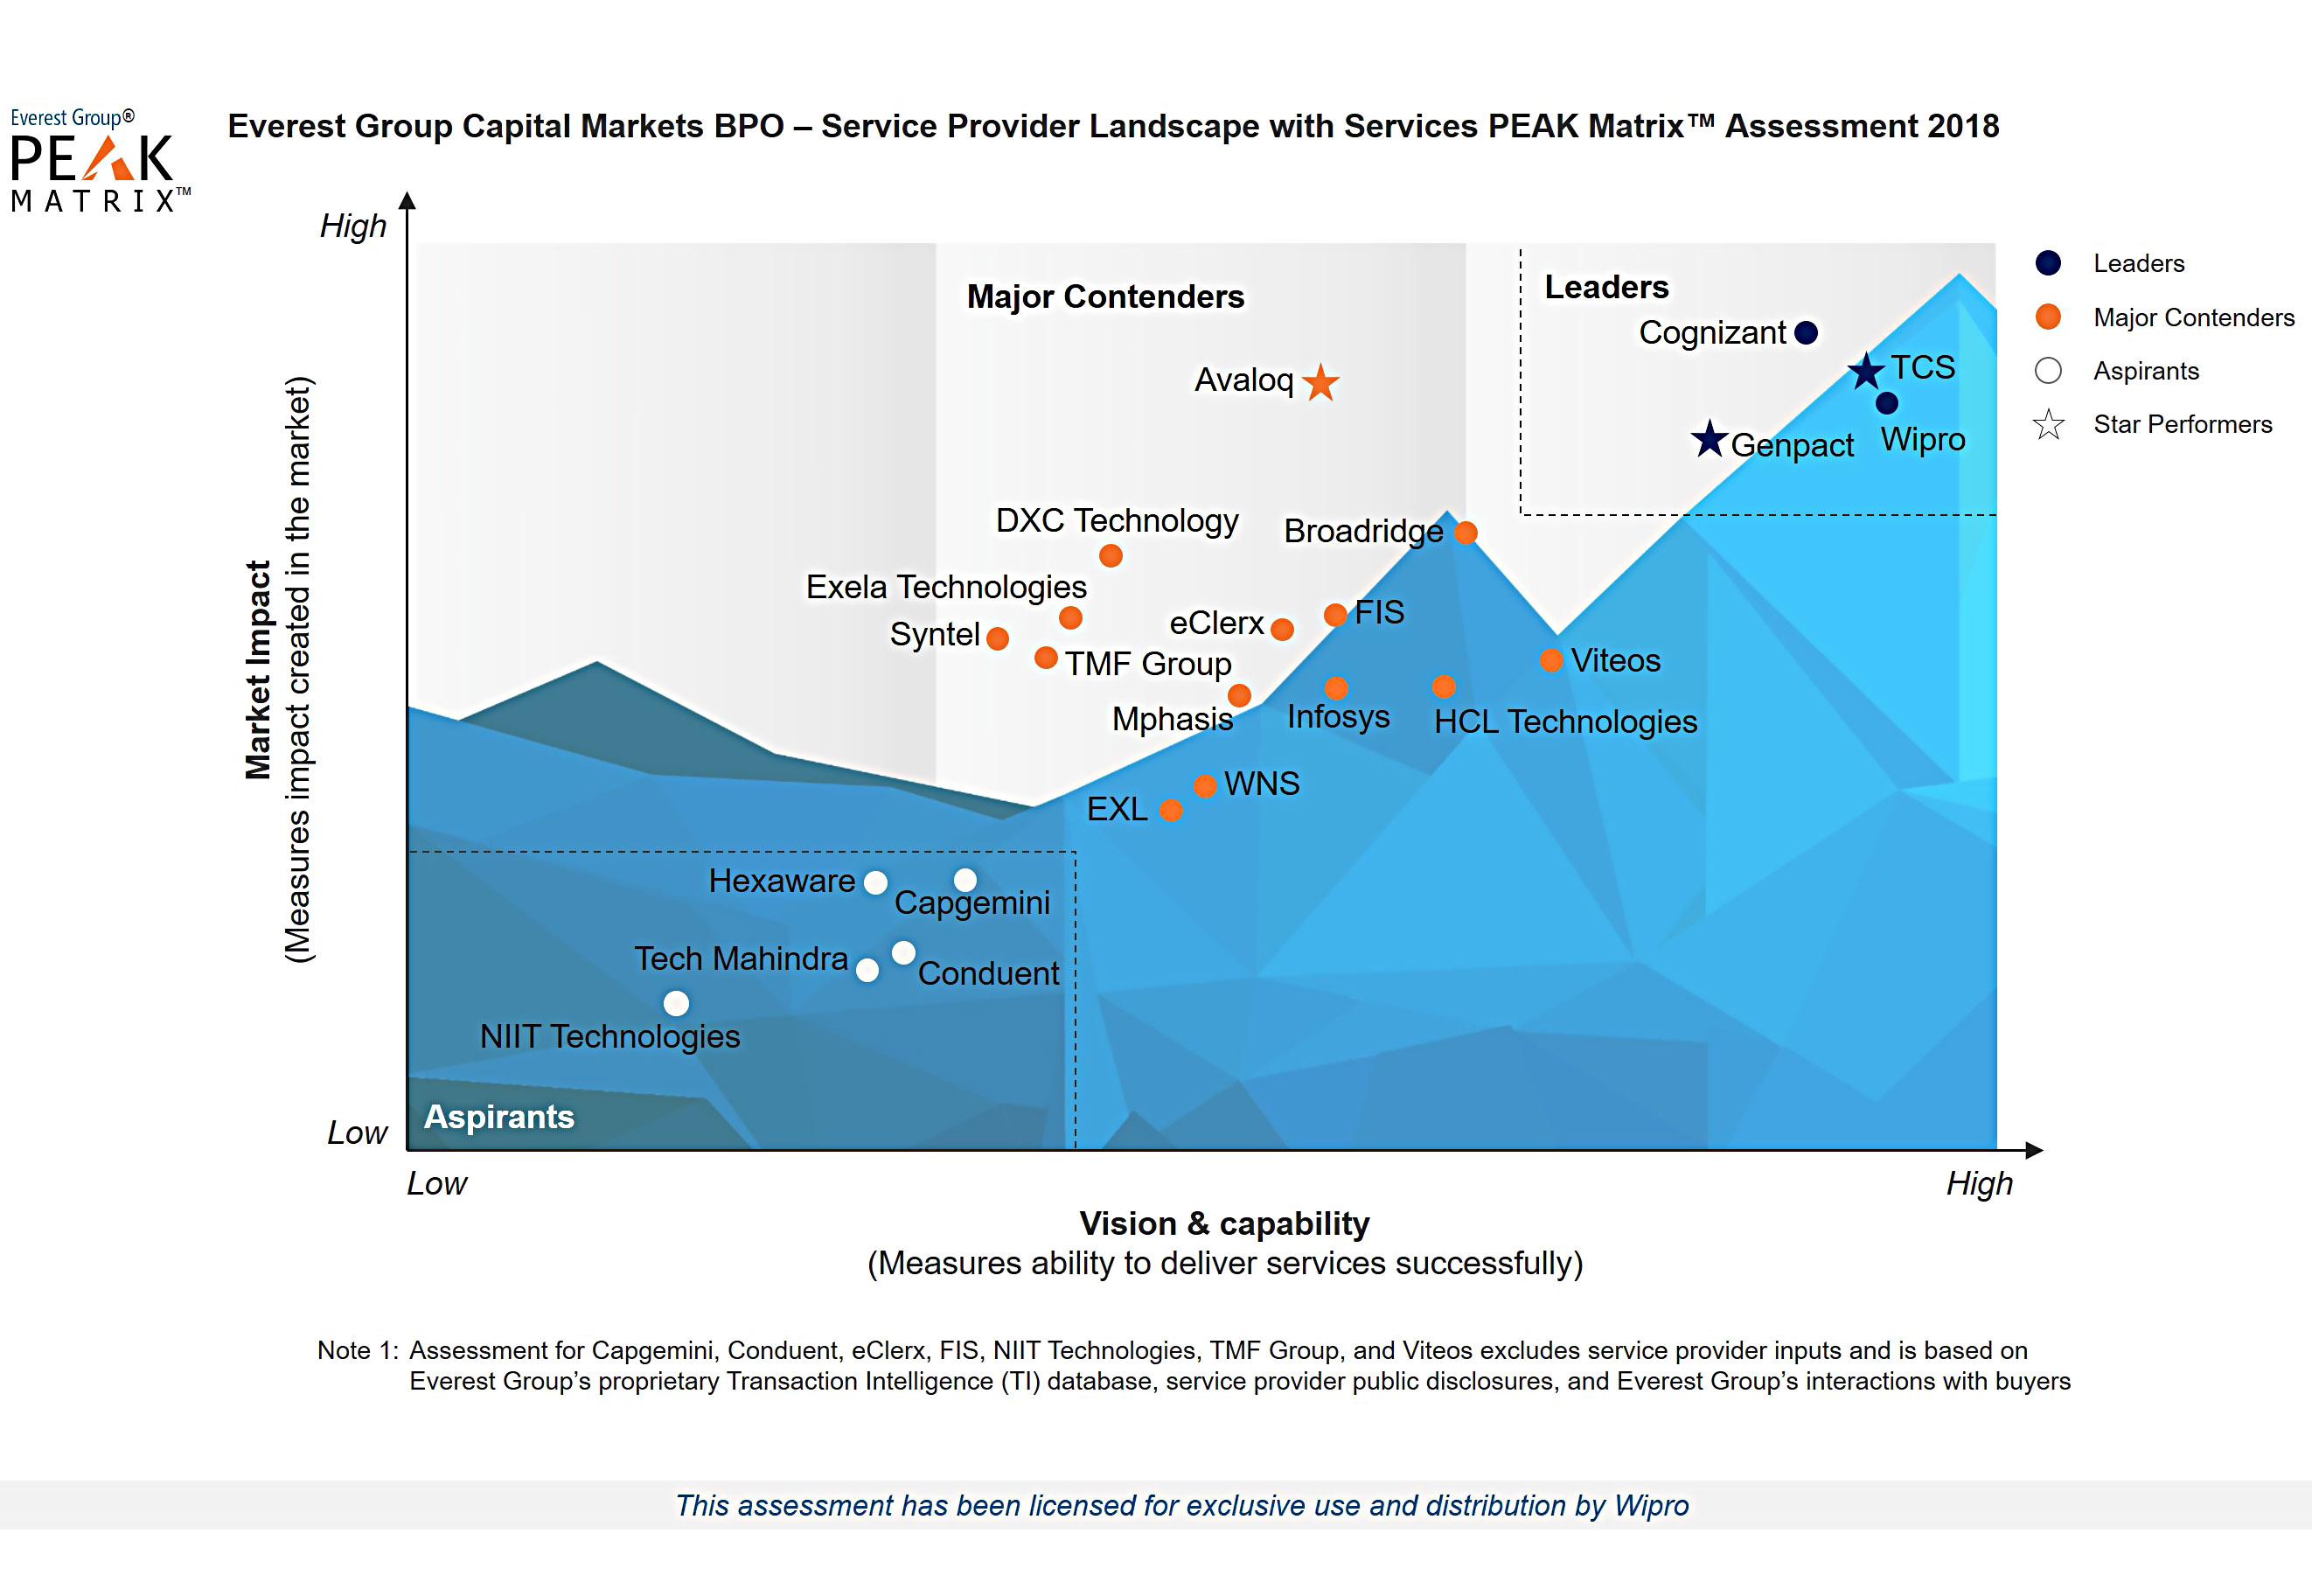 Wipro is a Leader in the Everest Group’s Capital Markets BPO Services PEAK Matrix™ Assessment 2018